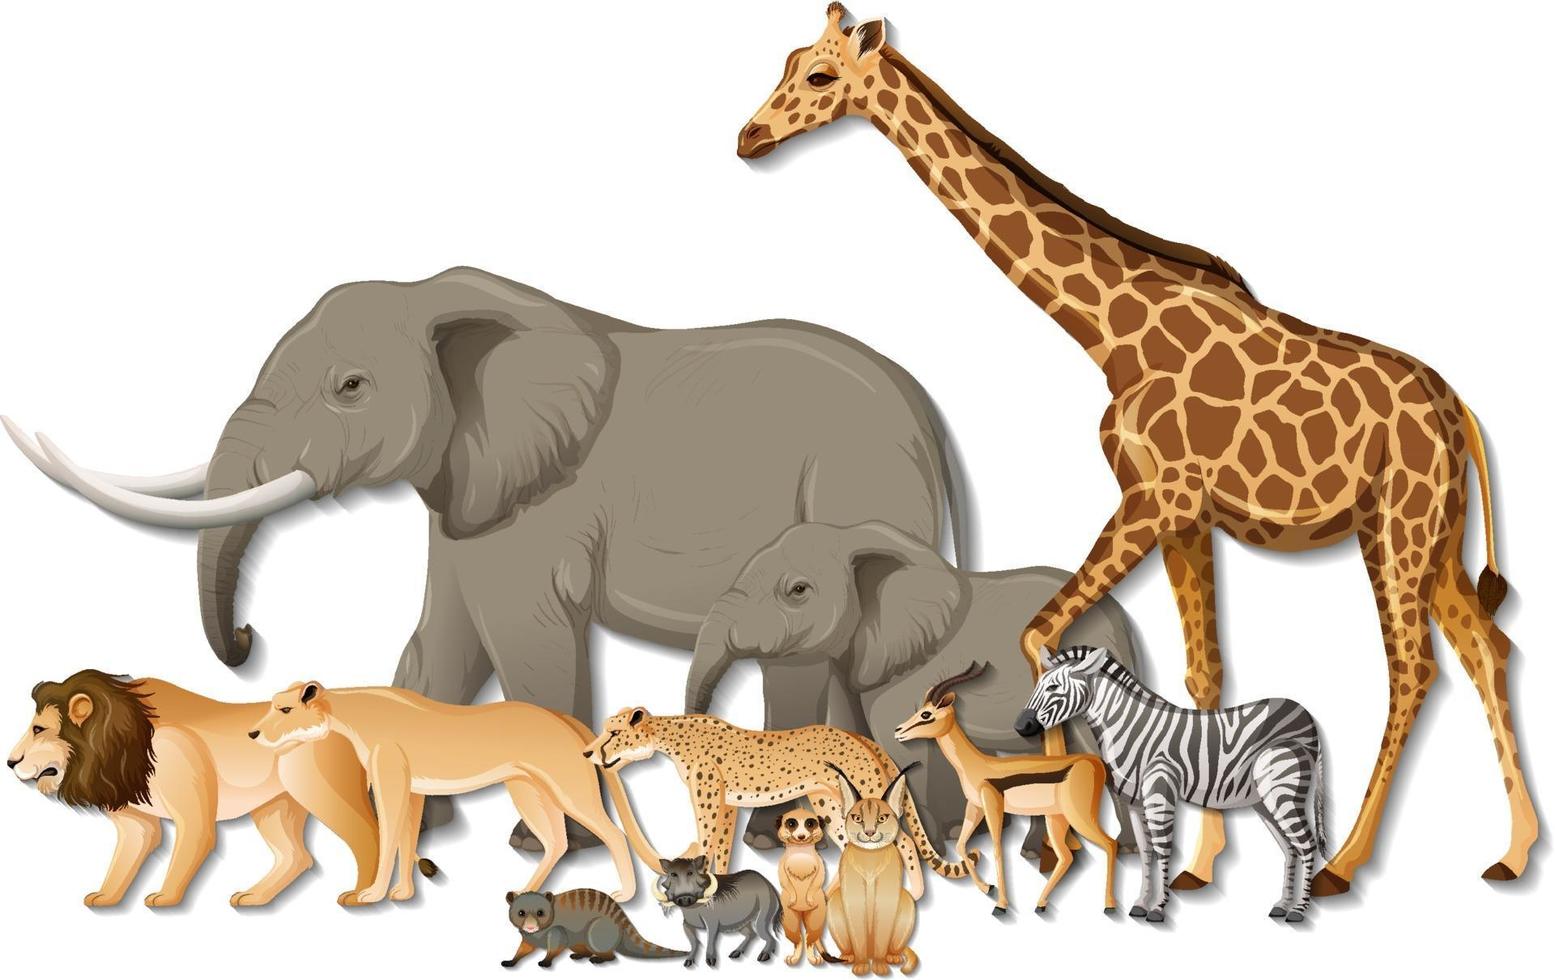 Group of wild African animals on white background vector